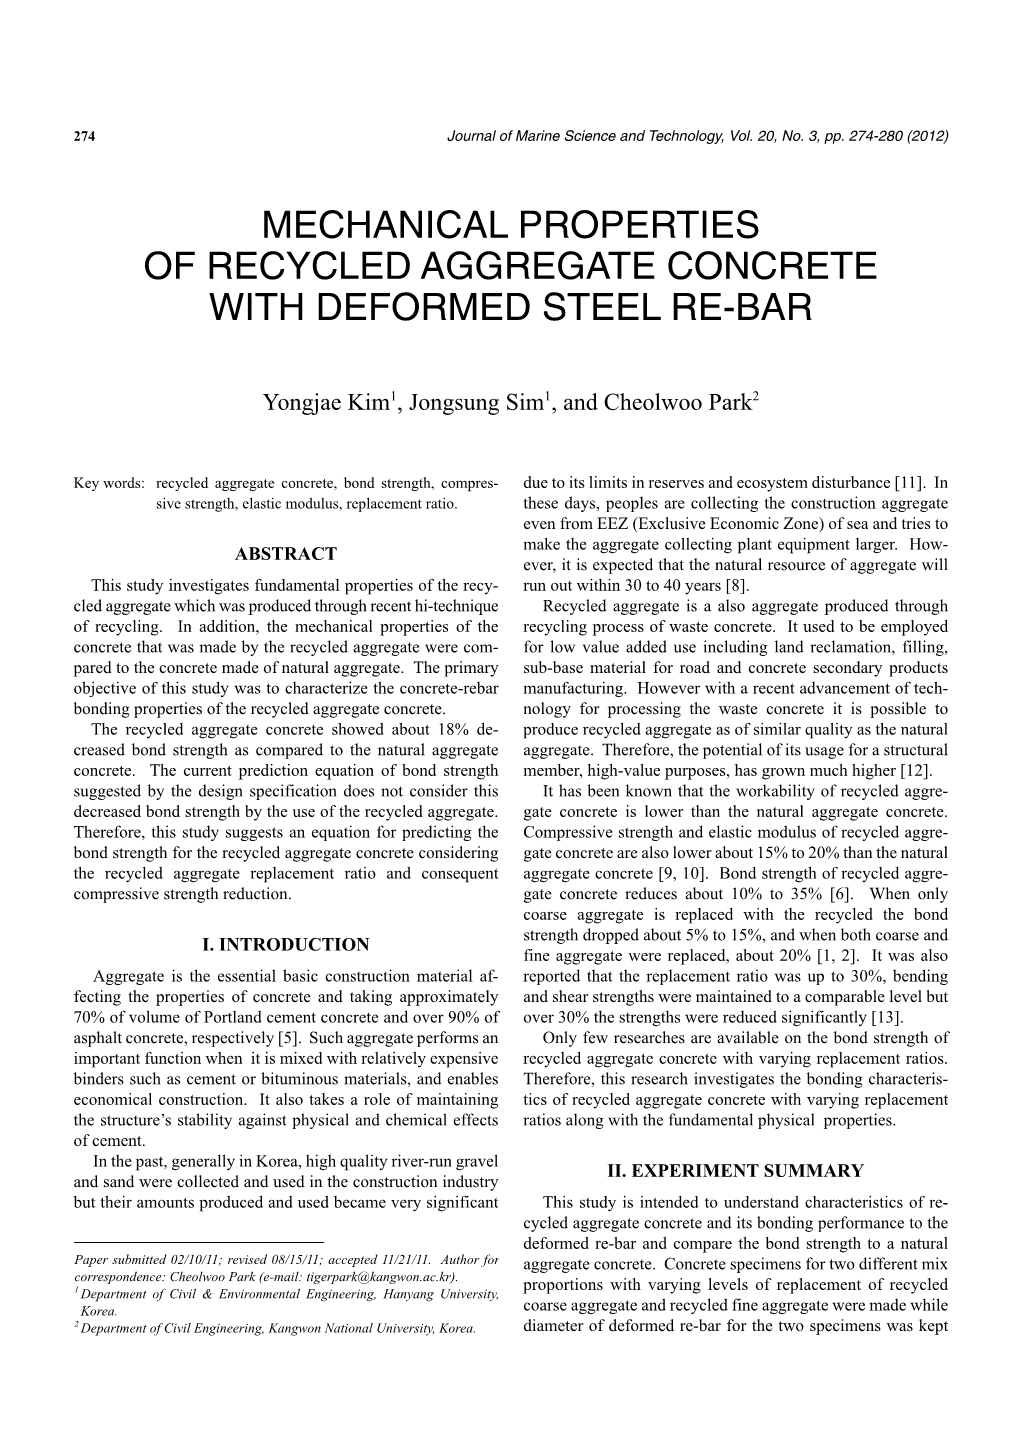 Mechanical Properties of Recycled Aggregate Concrete with Deformed Steel Re-Bar